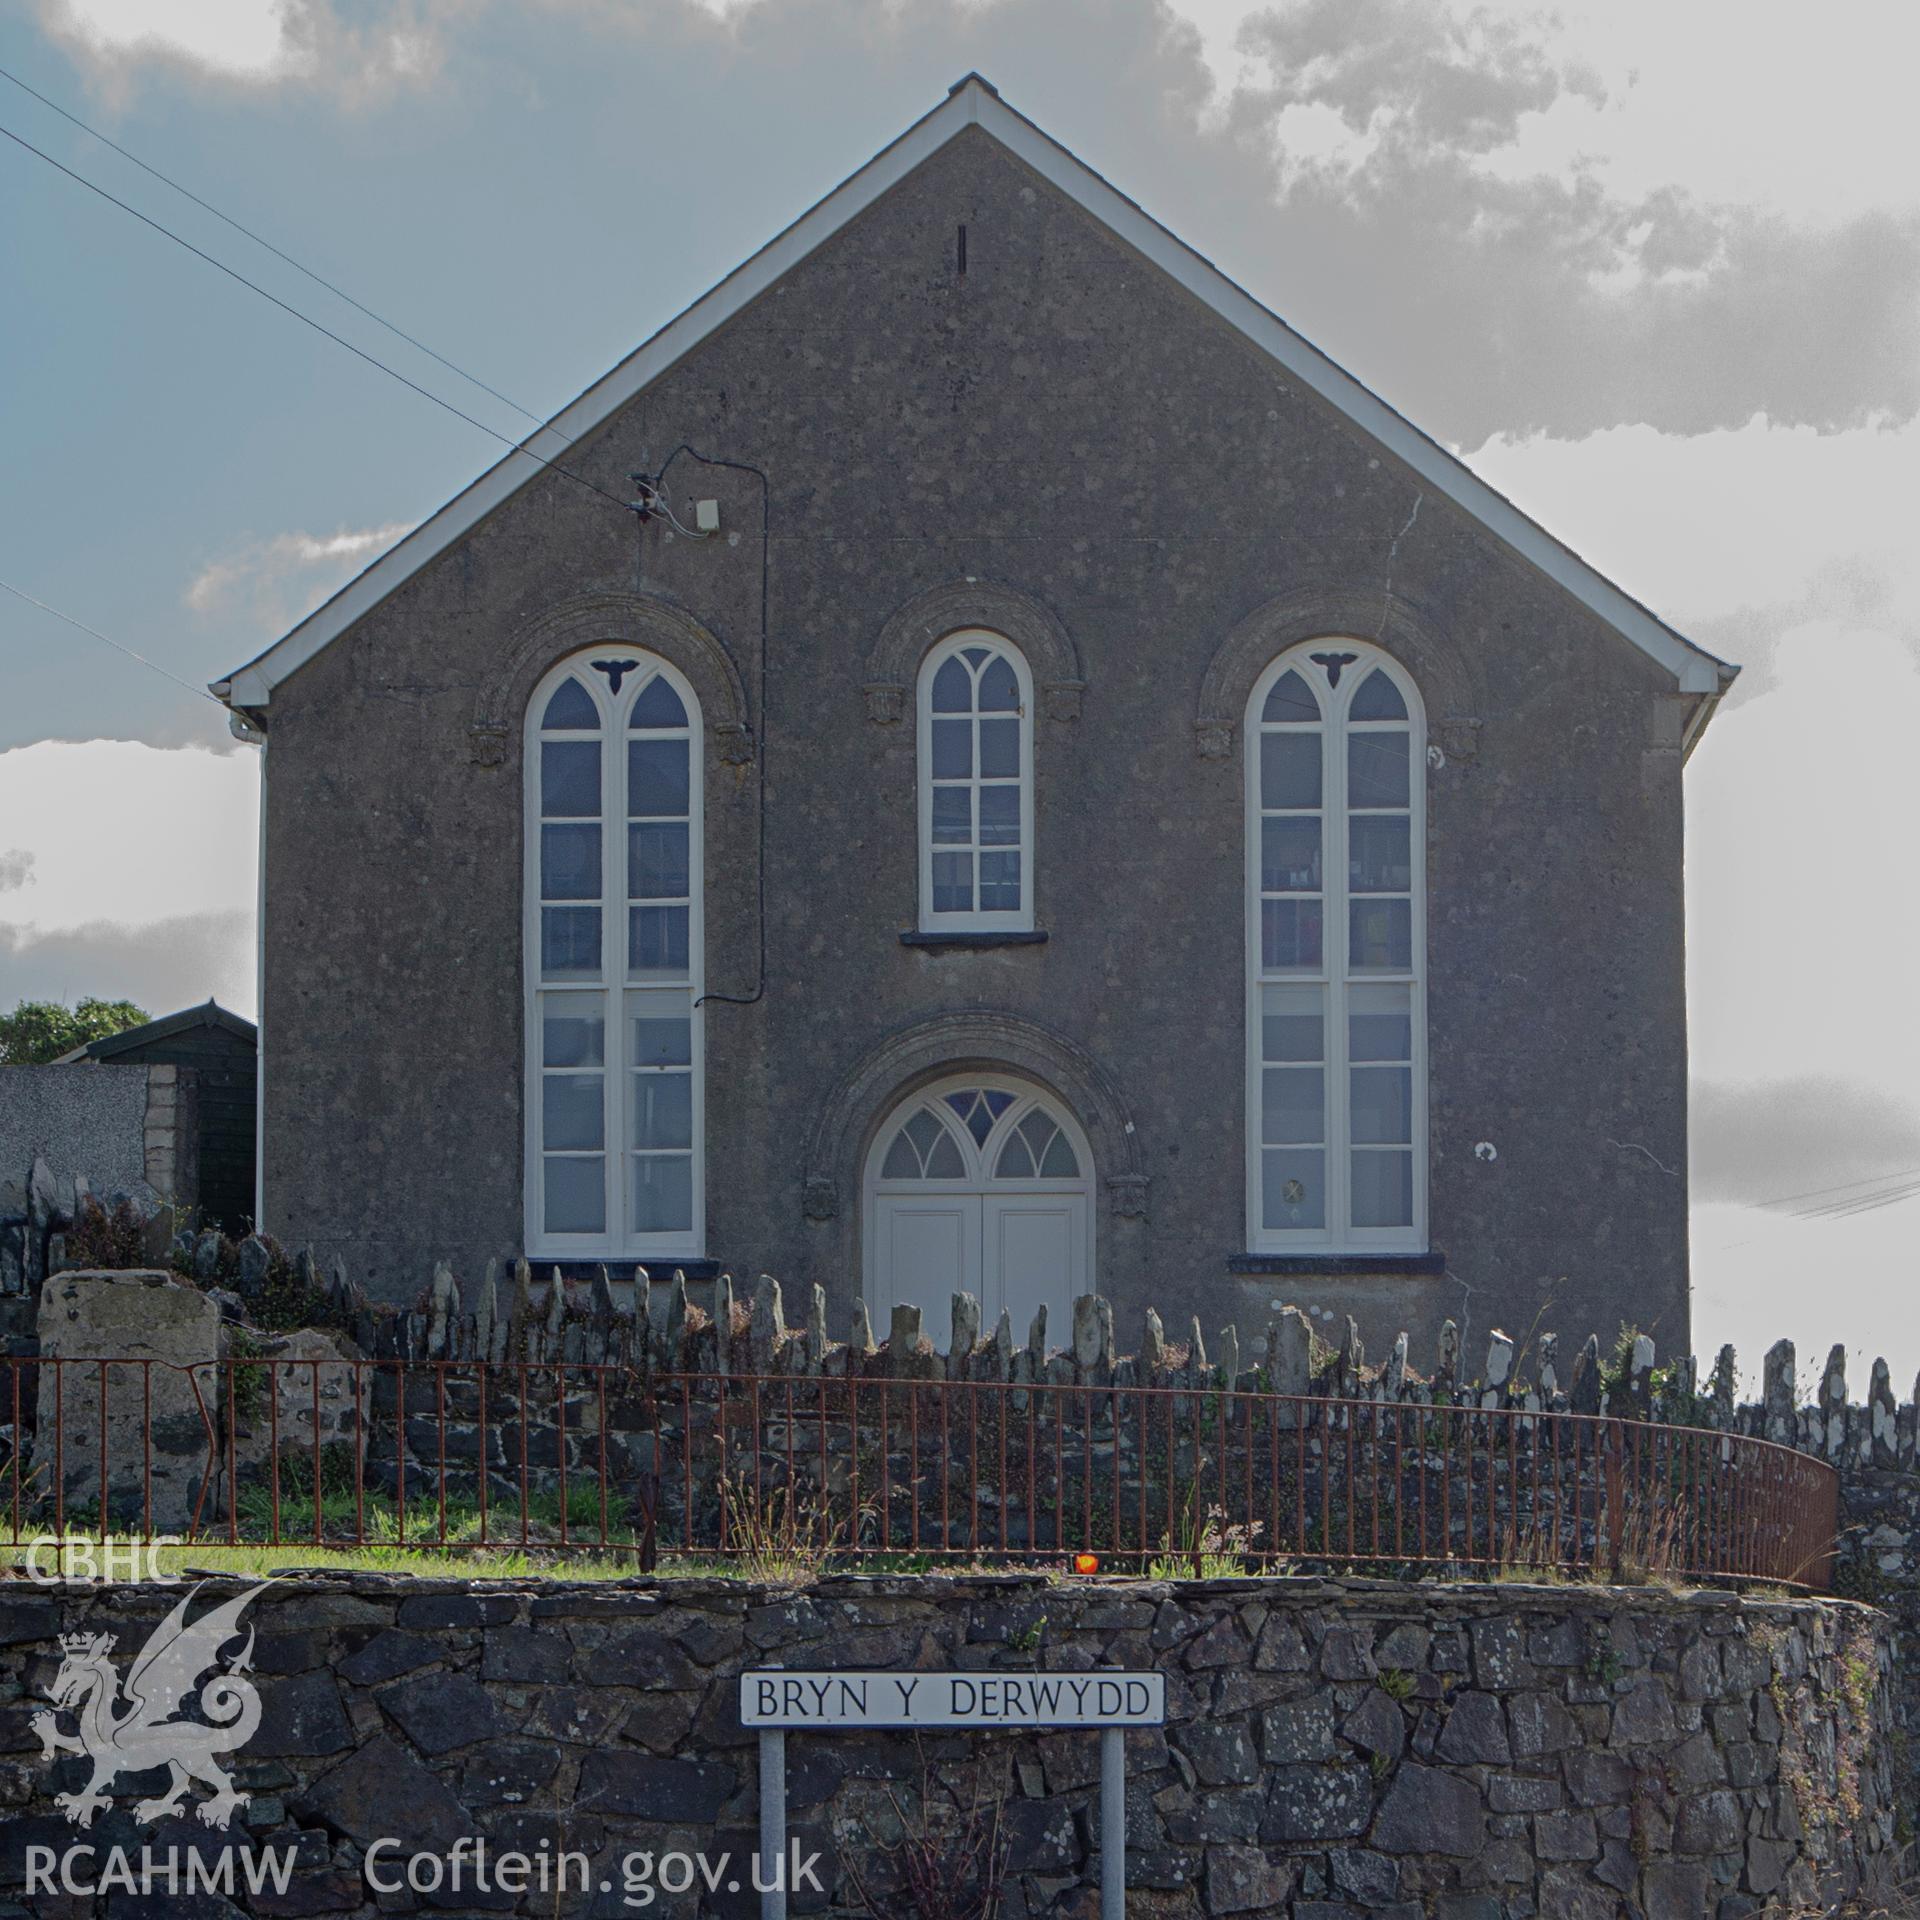 Colour photograph showing front elevation and entrance of Elim Capel Bach Baptist Sunday School, Trefin. Photographed by Richard Barrett on 22nd June 2018.